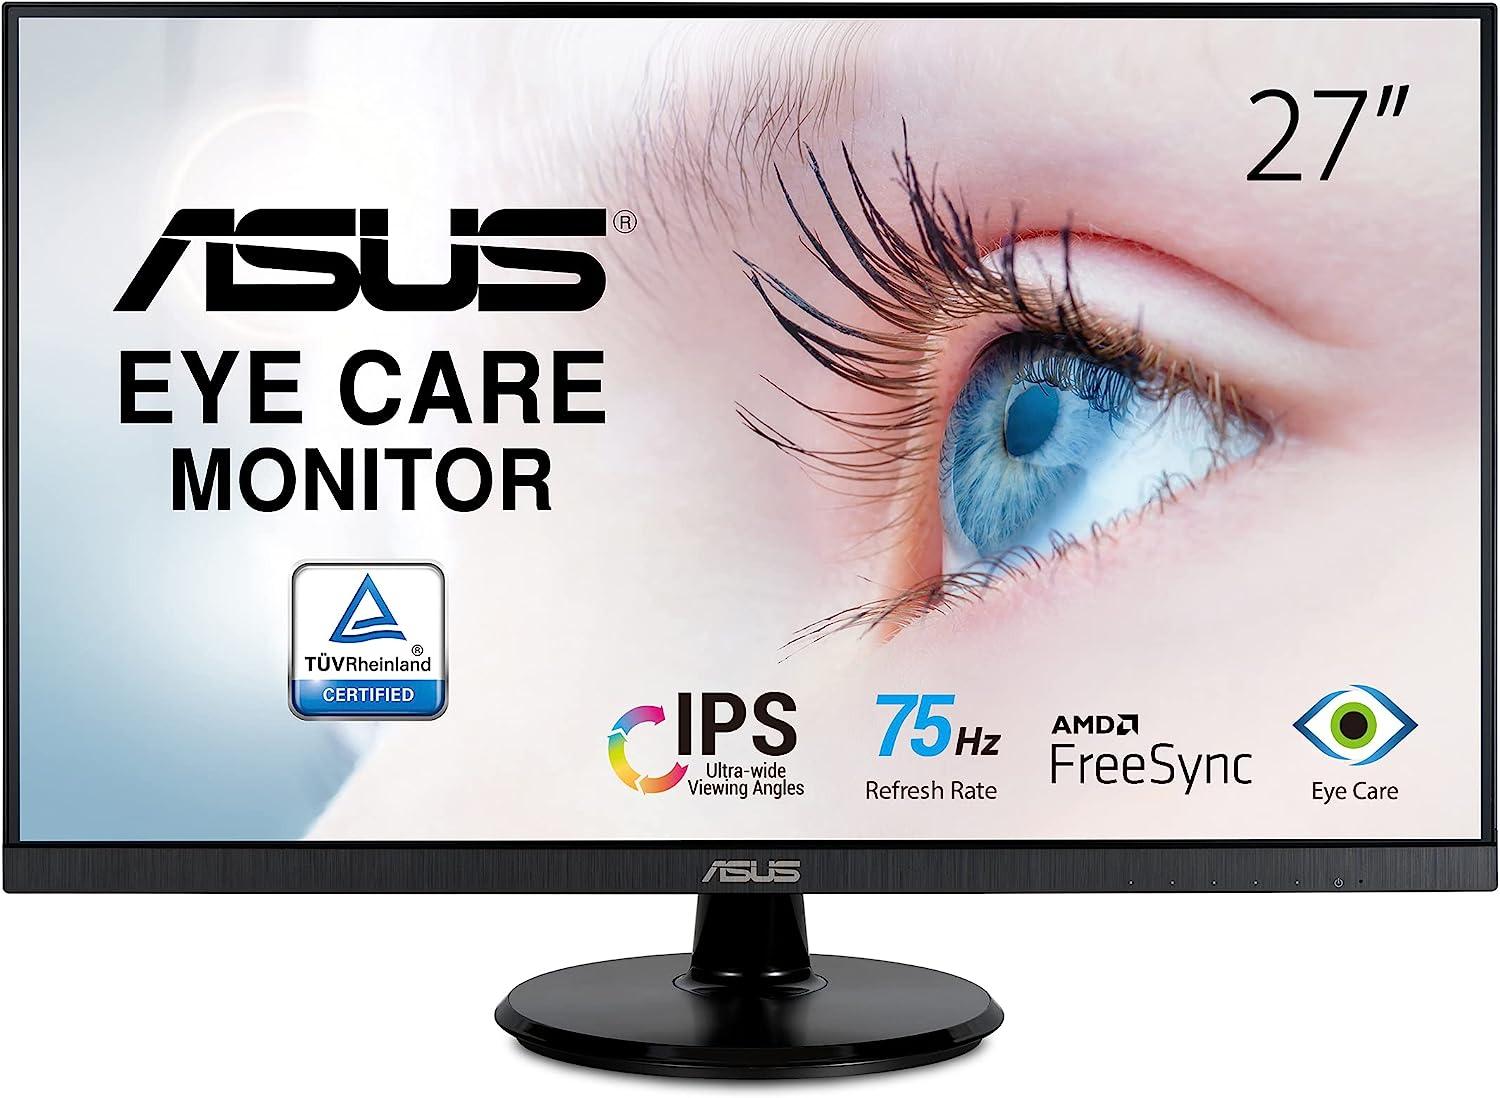 27in Asus VA27DQ 1080p Full HD Monitor for $109 Shipped